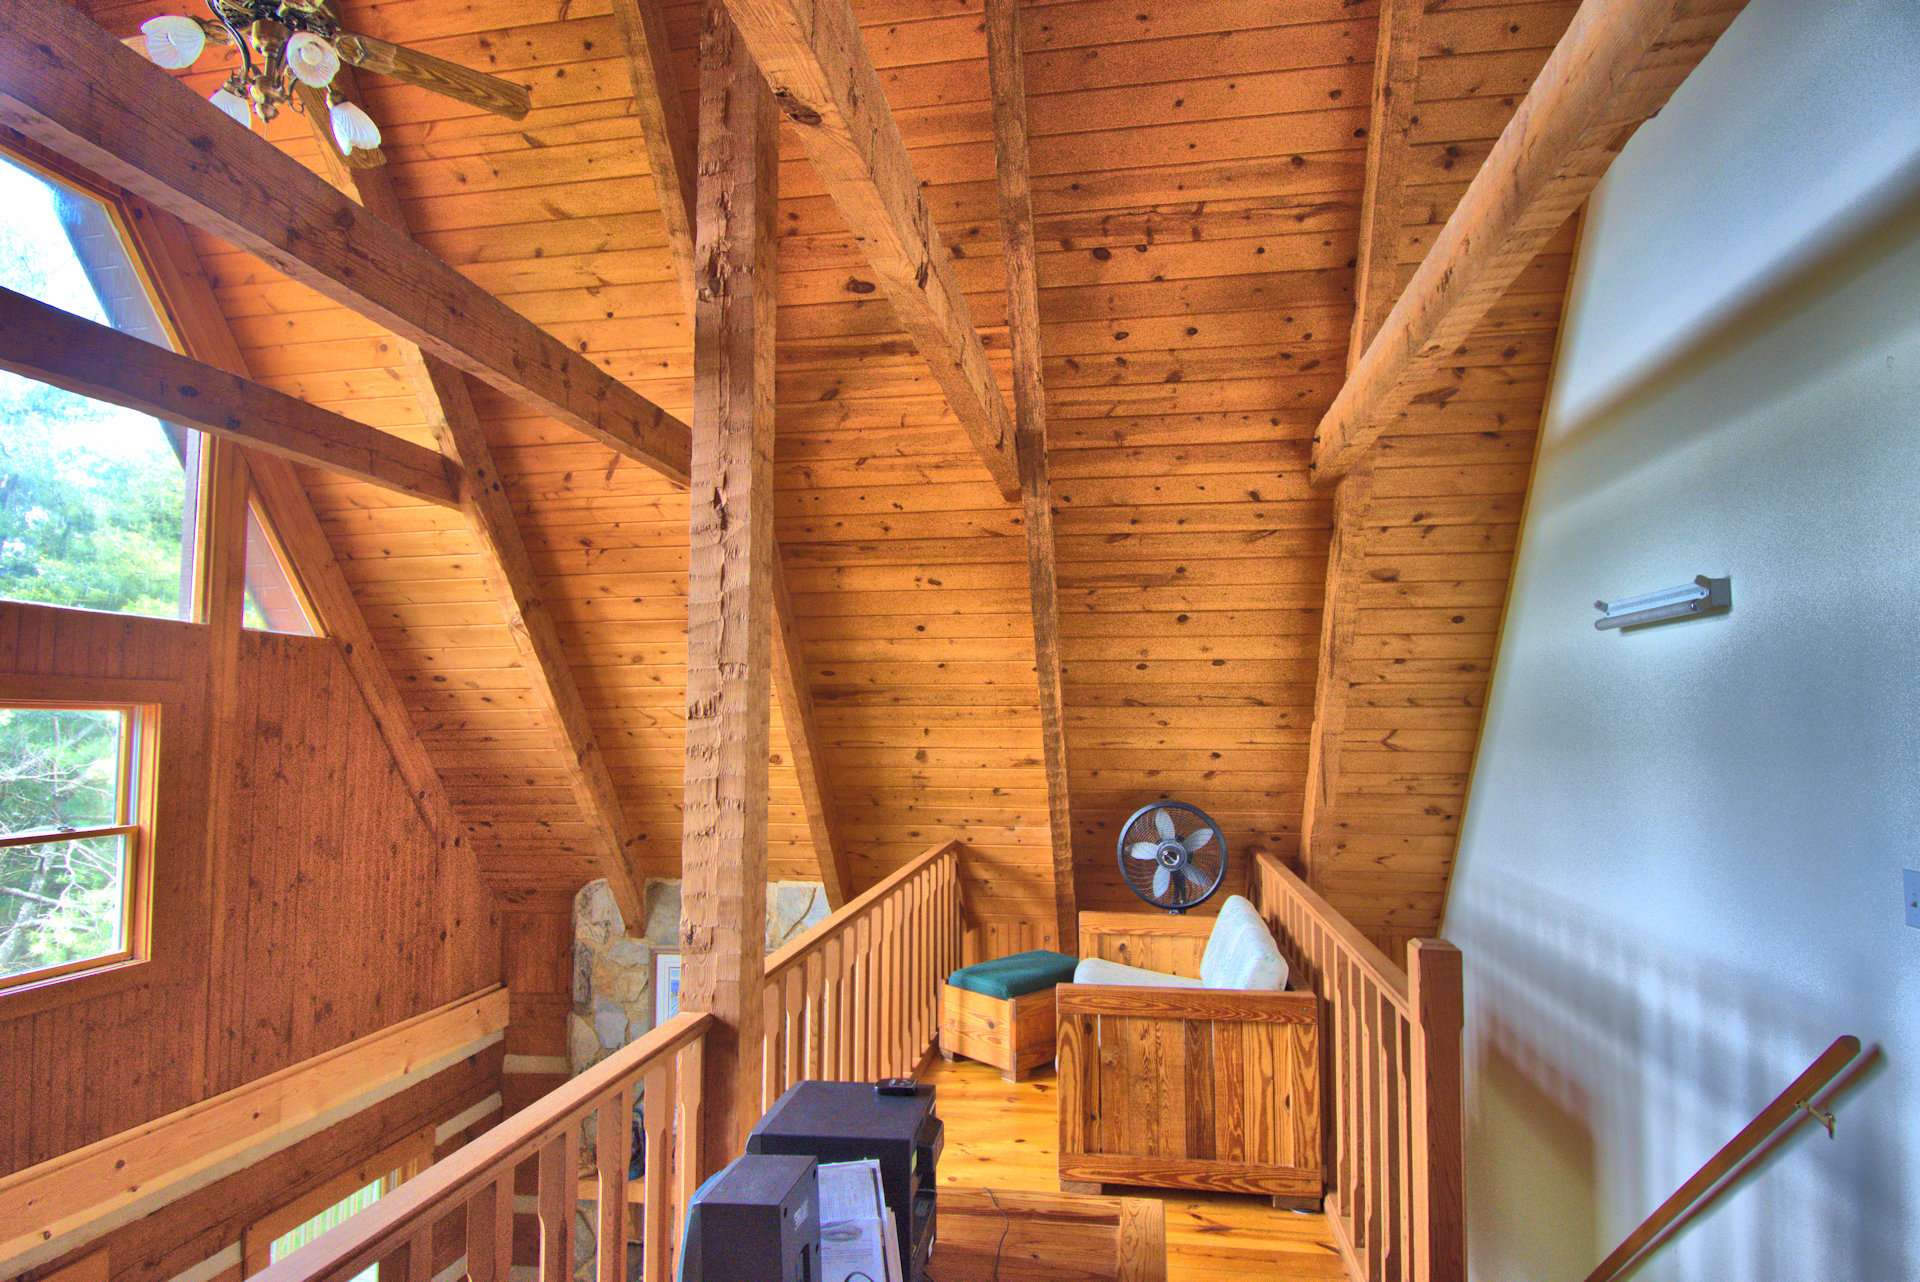 You will appreciate the architectural features and views from the loft area.